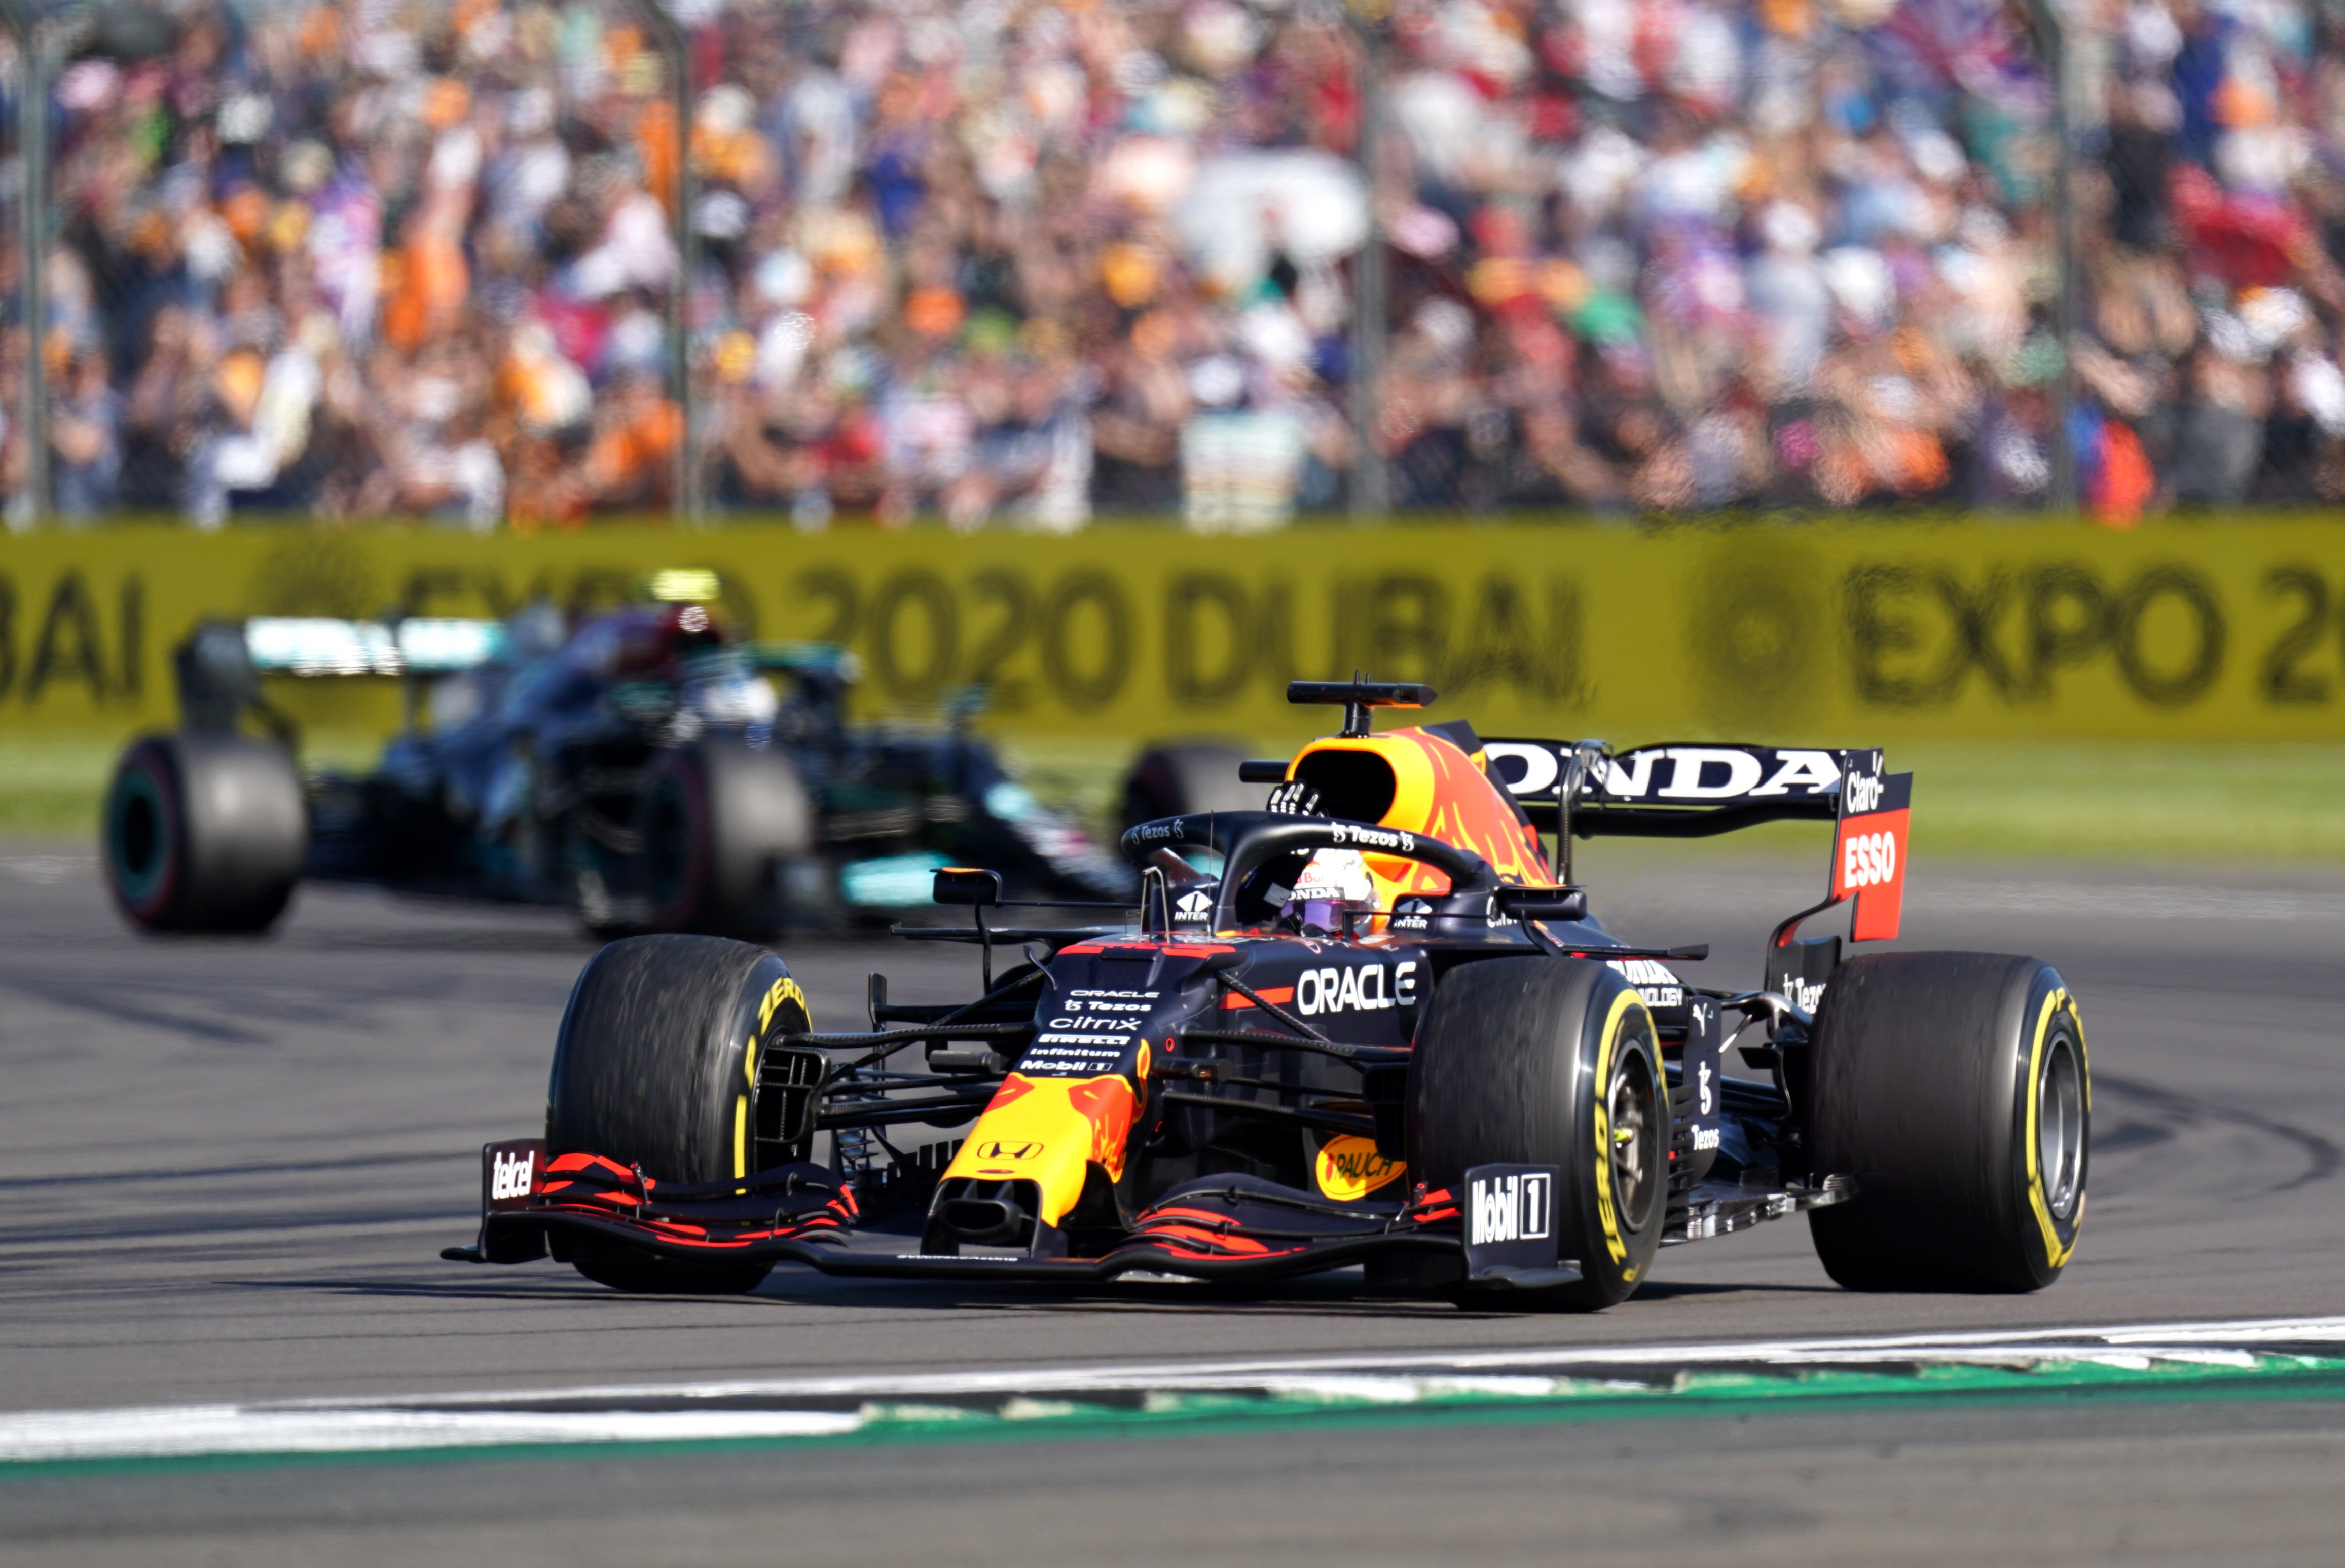 Max Verstappen passed Lewis Hamilton to secure pole position